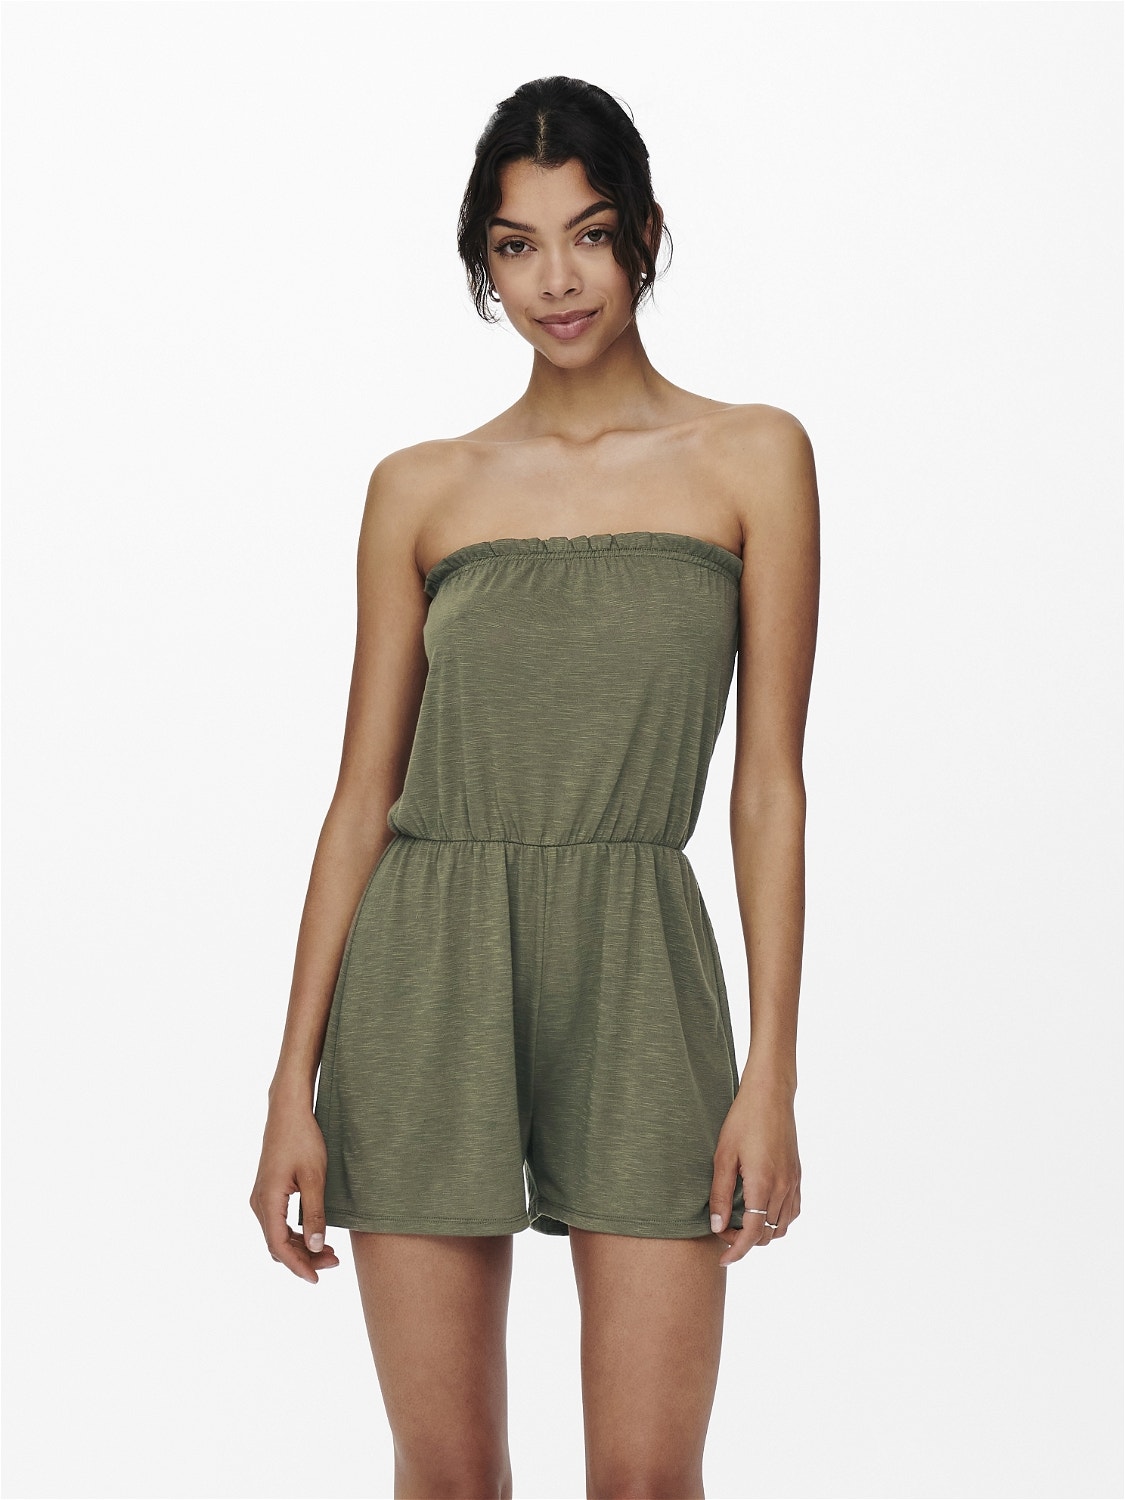 ONLY Schlauch Playsuit -Kalamata - 15243782